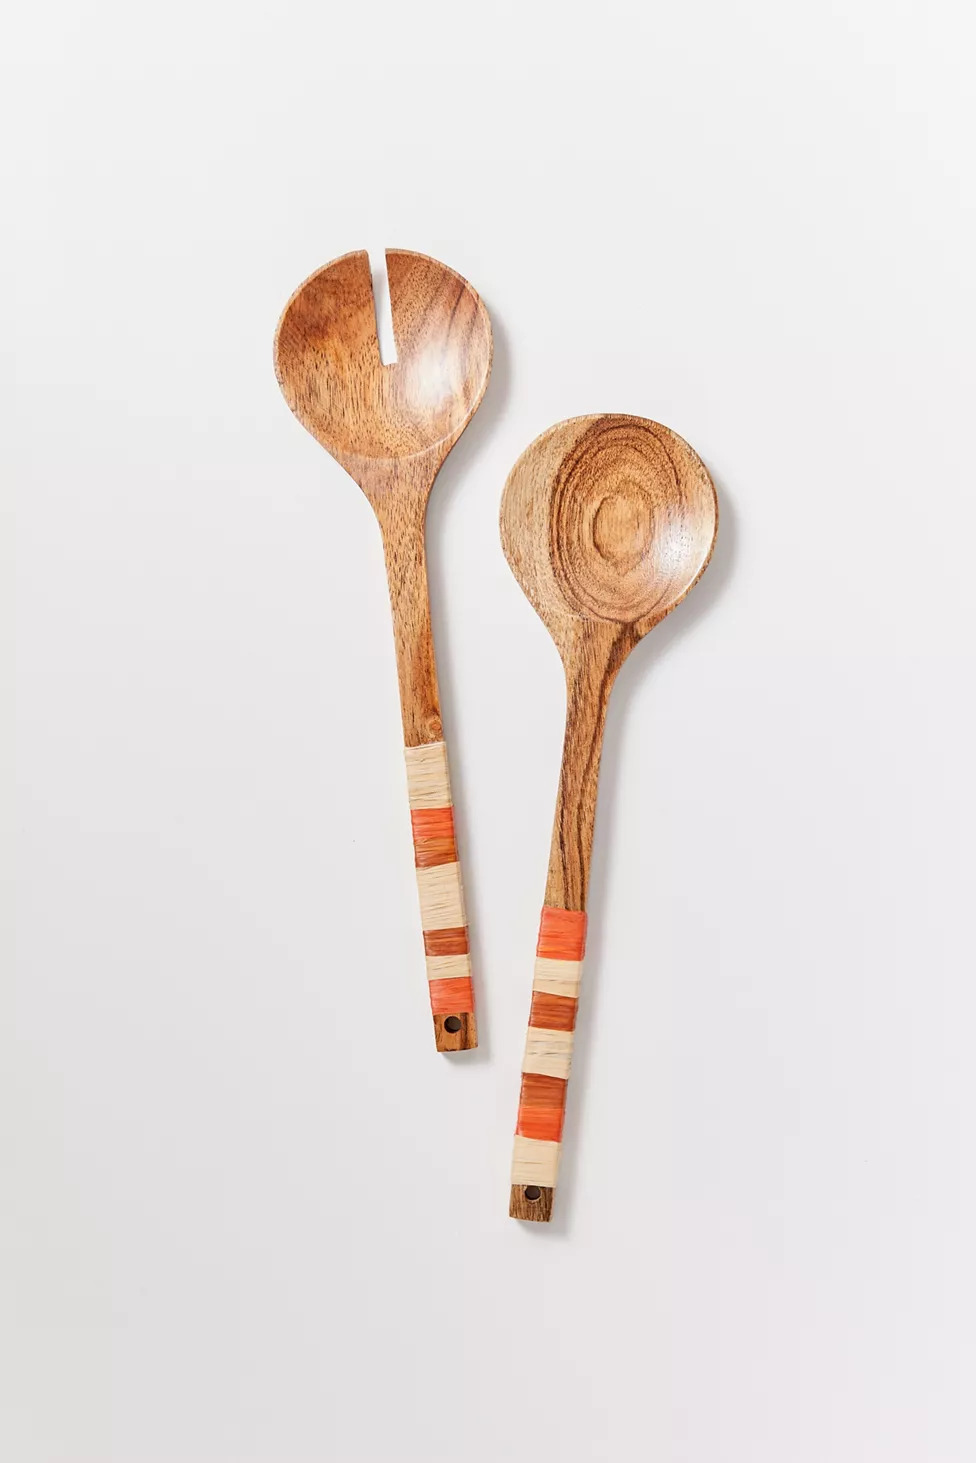 uo wrapped utensils al fresco dining at home